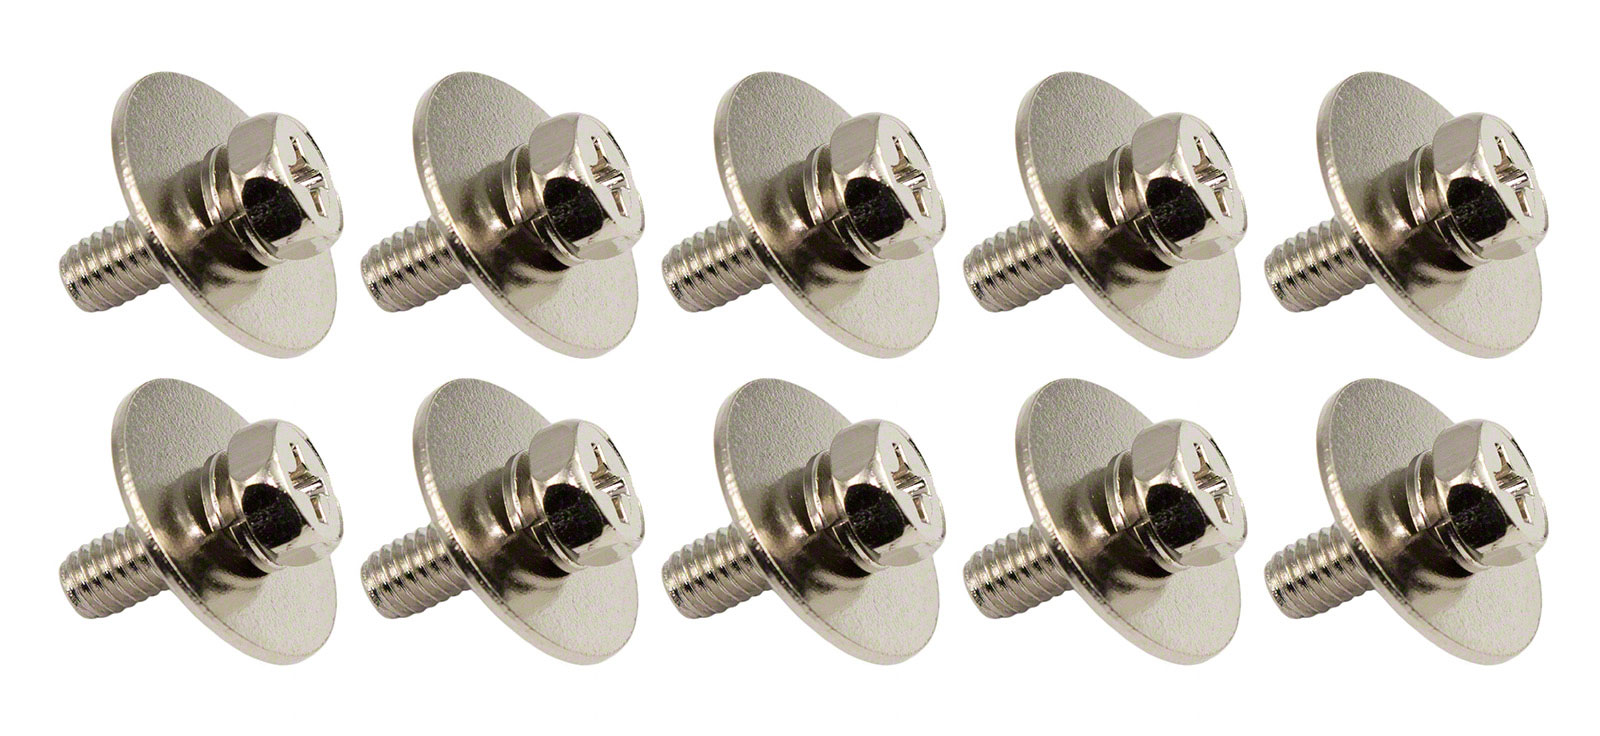 SPAREDRUM WSC4-11 - M4 11MM - MOUNTING SCREW FOR WOODEN SHELL (X10)